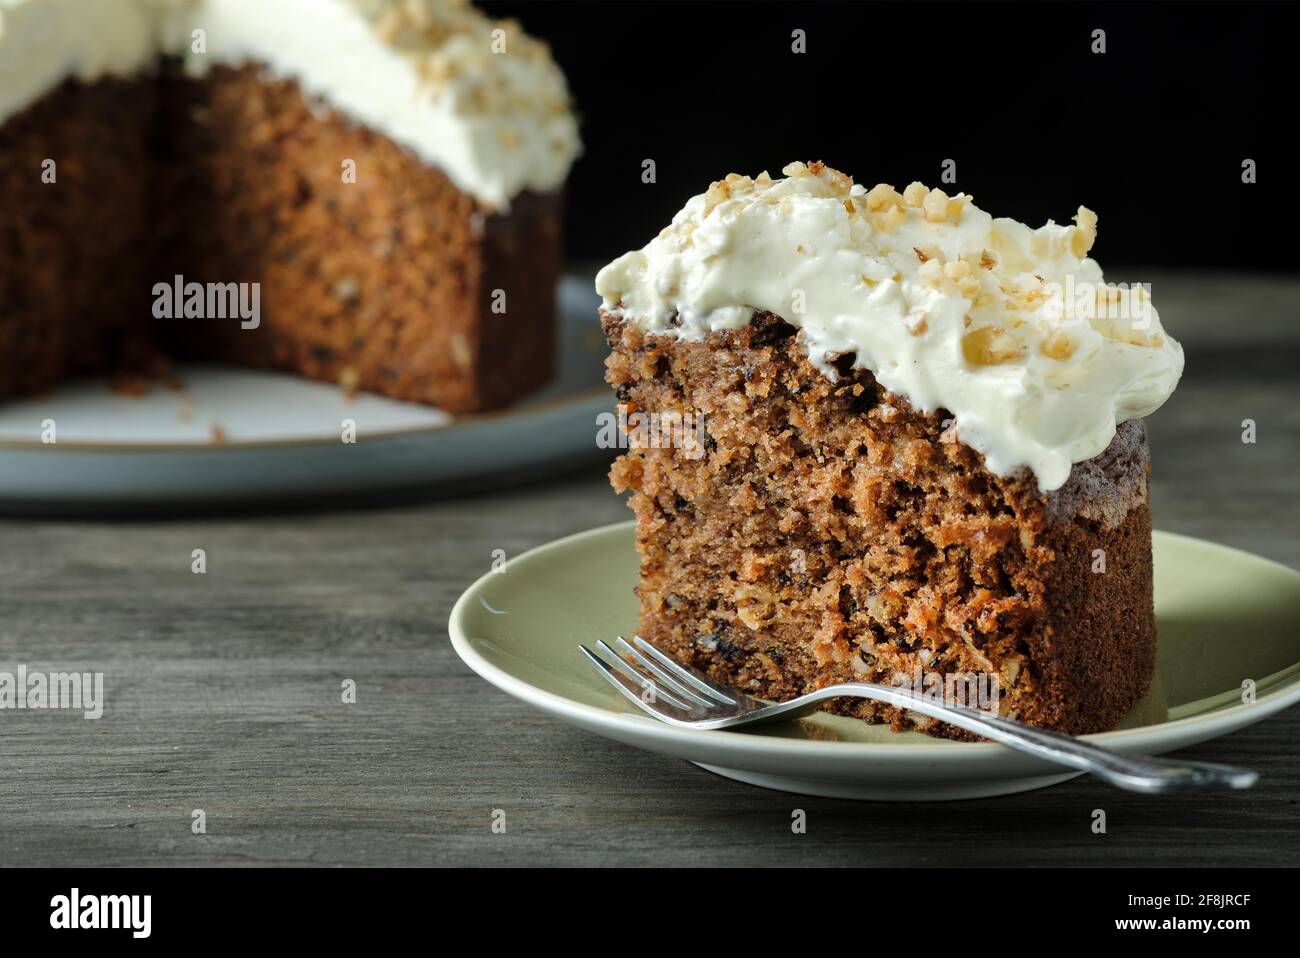 A home baked gluten free carrot and walnut cake. This moist cake has an indulgent cream cheese topping and was made with gluten free ingredients Stock Photo